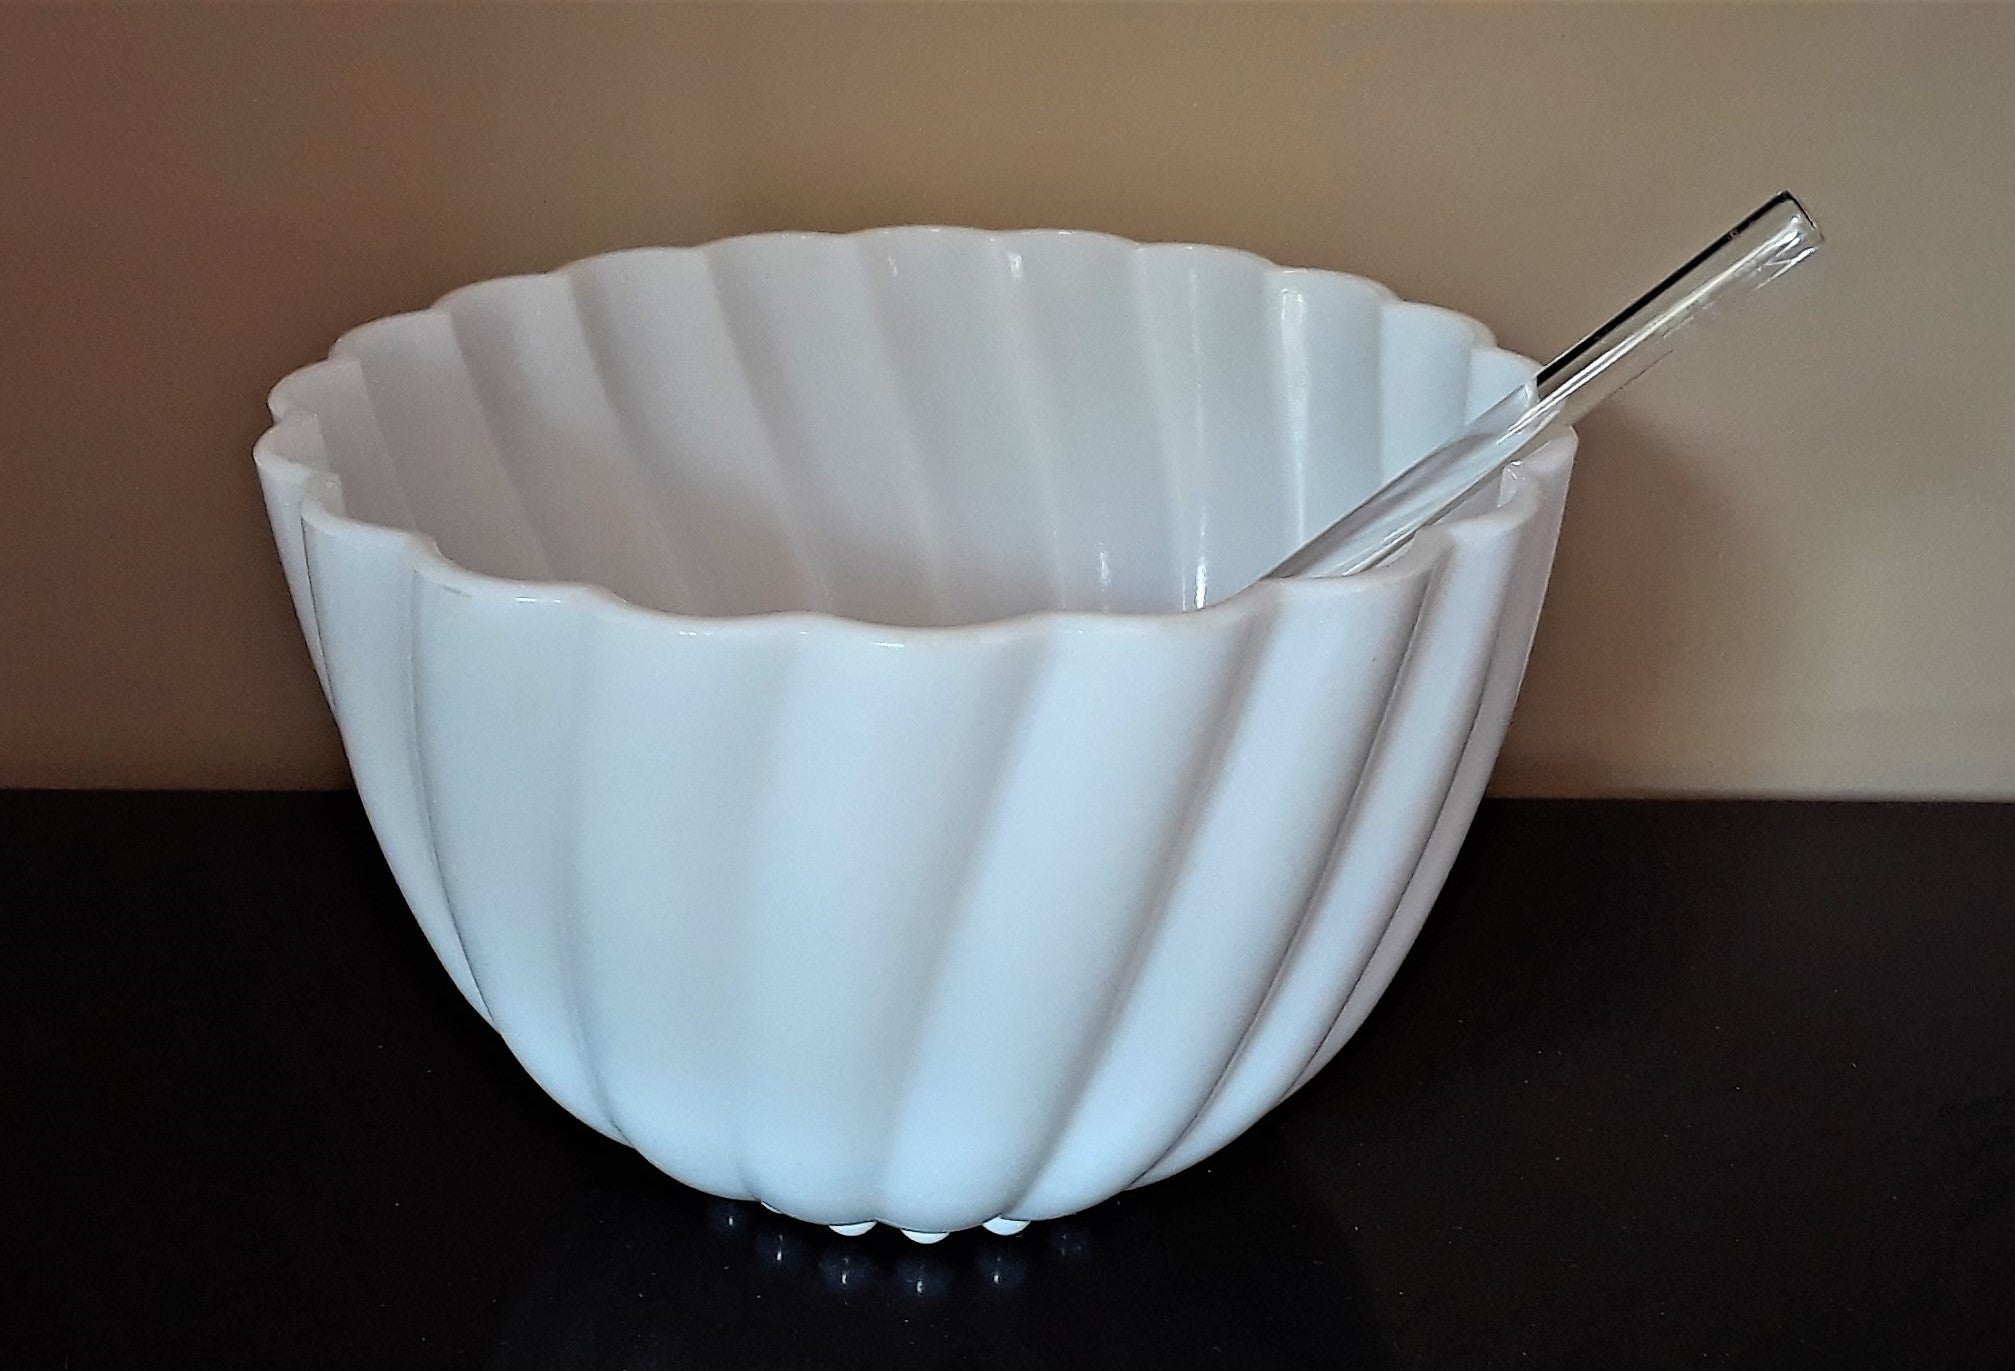 Milk Glass Punch Bowl. Party Rentals. Royal Table Settings